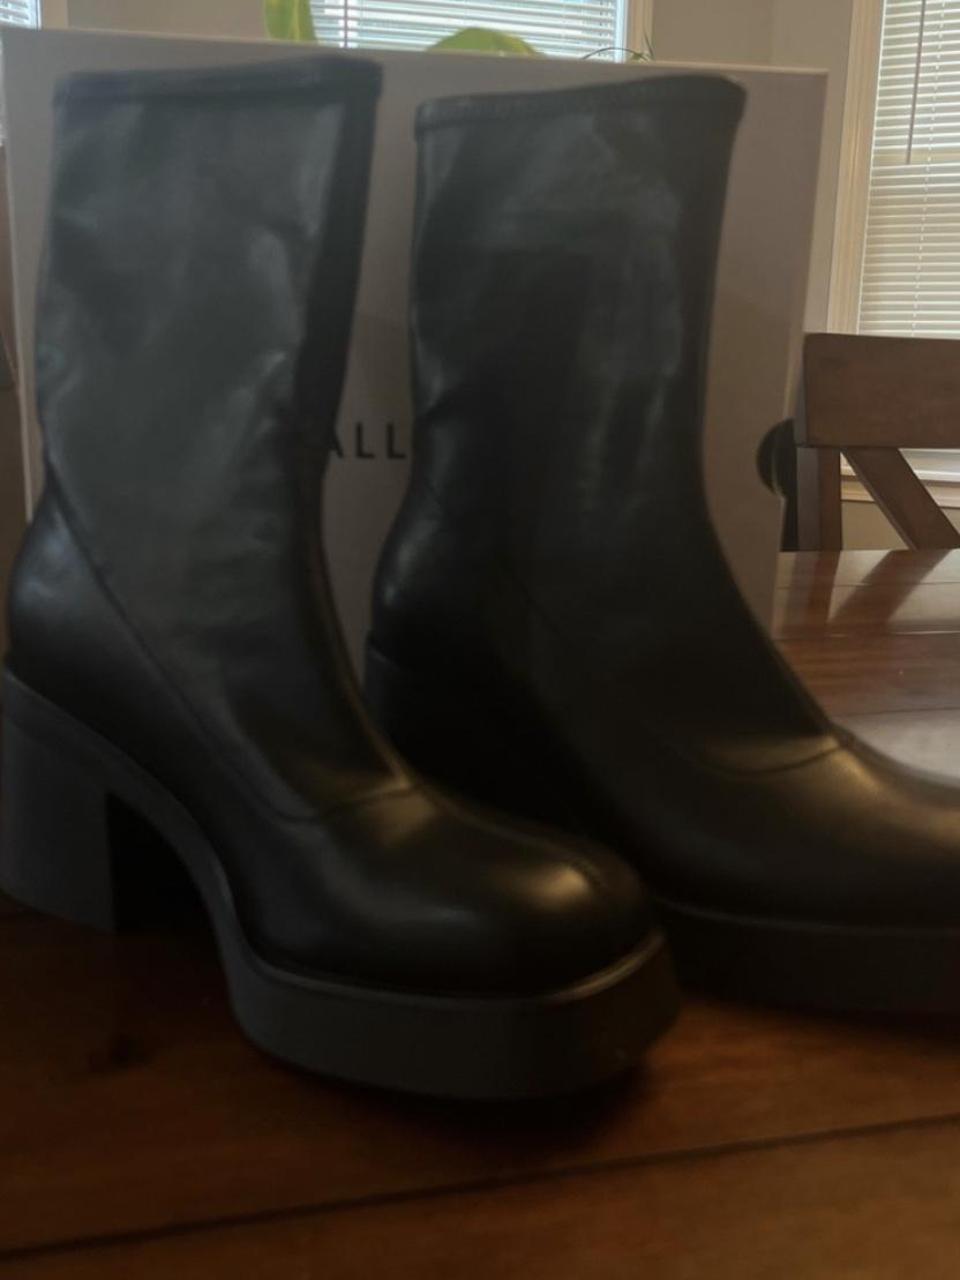 Call it Spring Women's Black Boots (3)